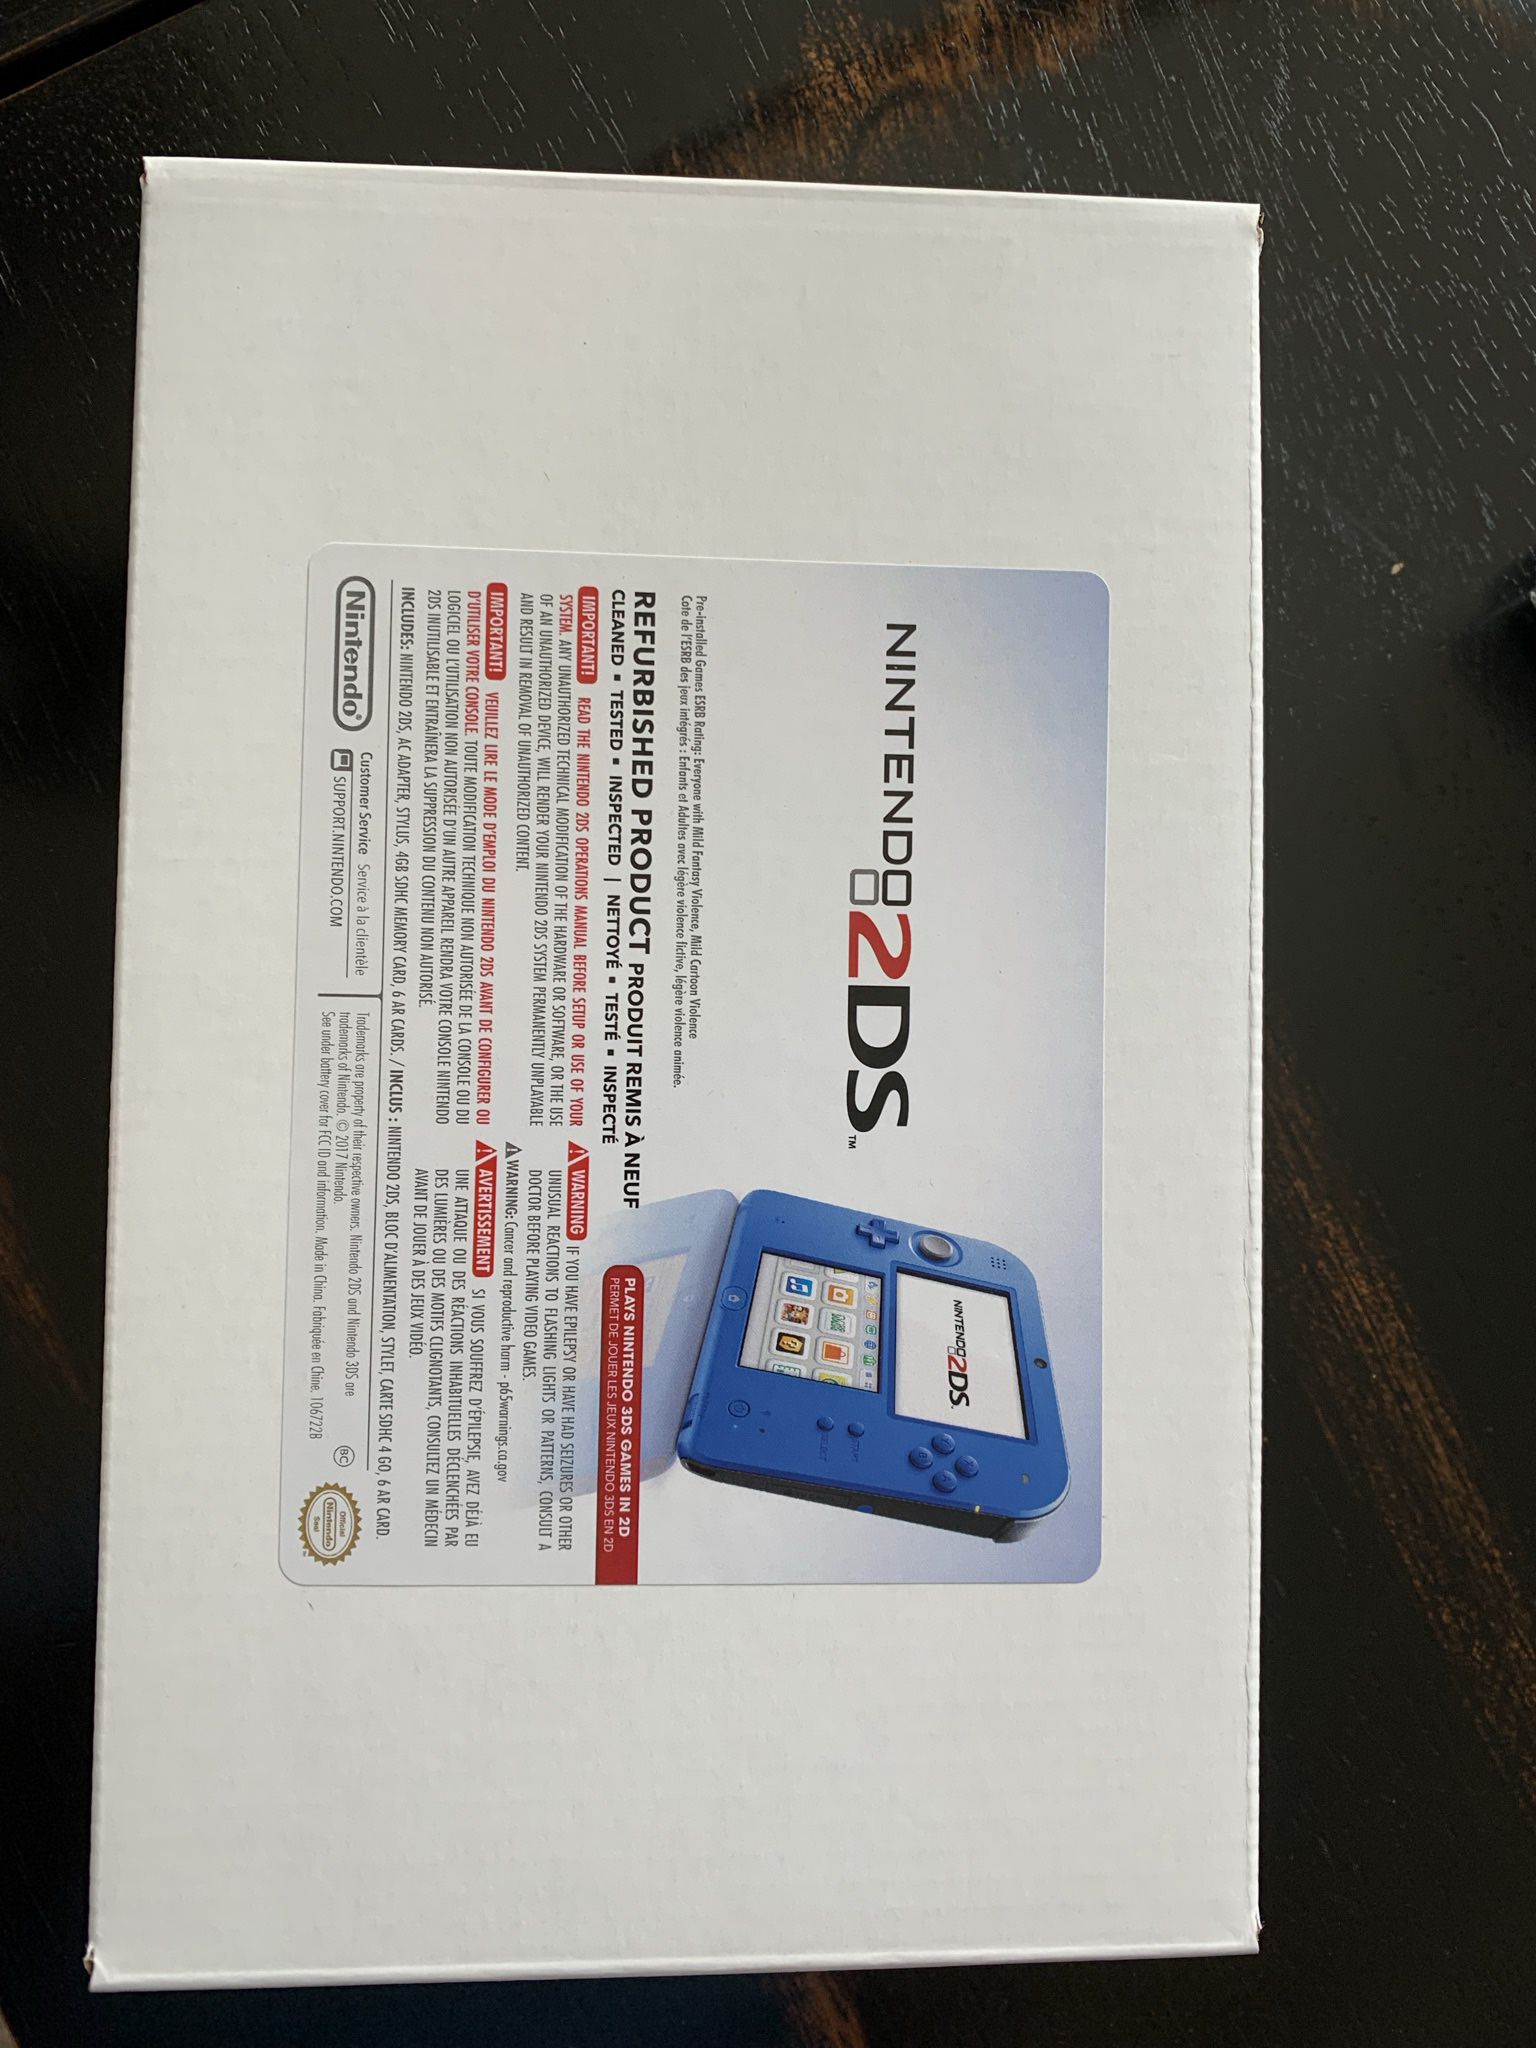 nintendo 2ds like new plays 3ds and ds game